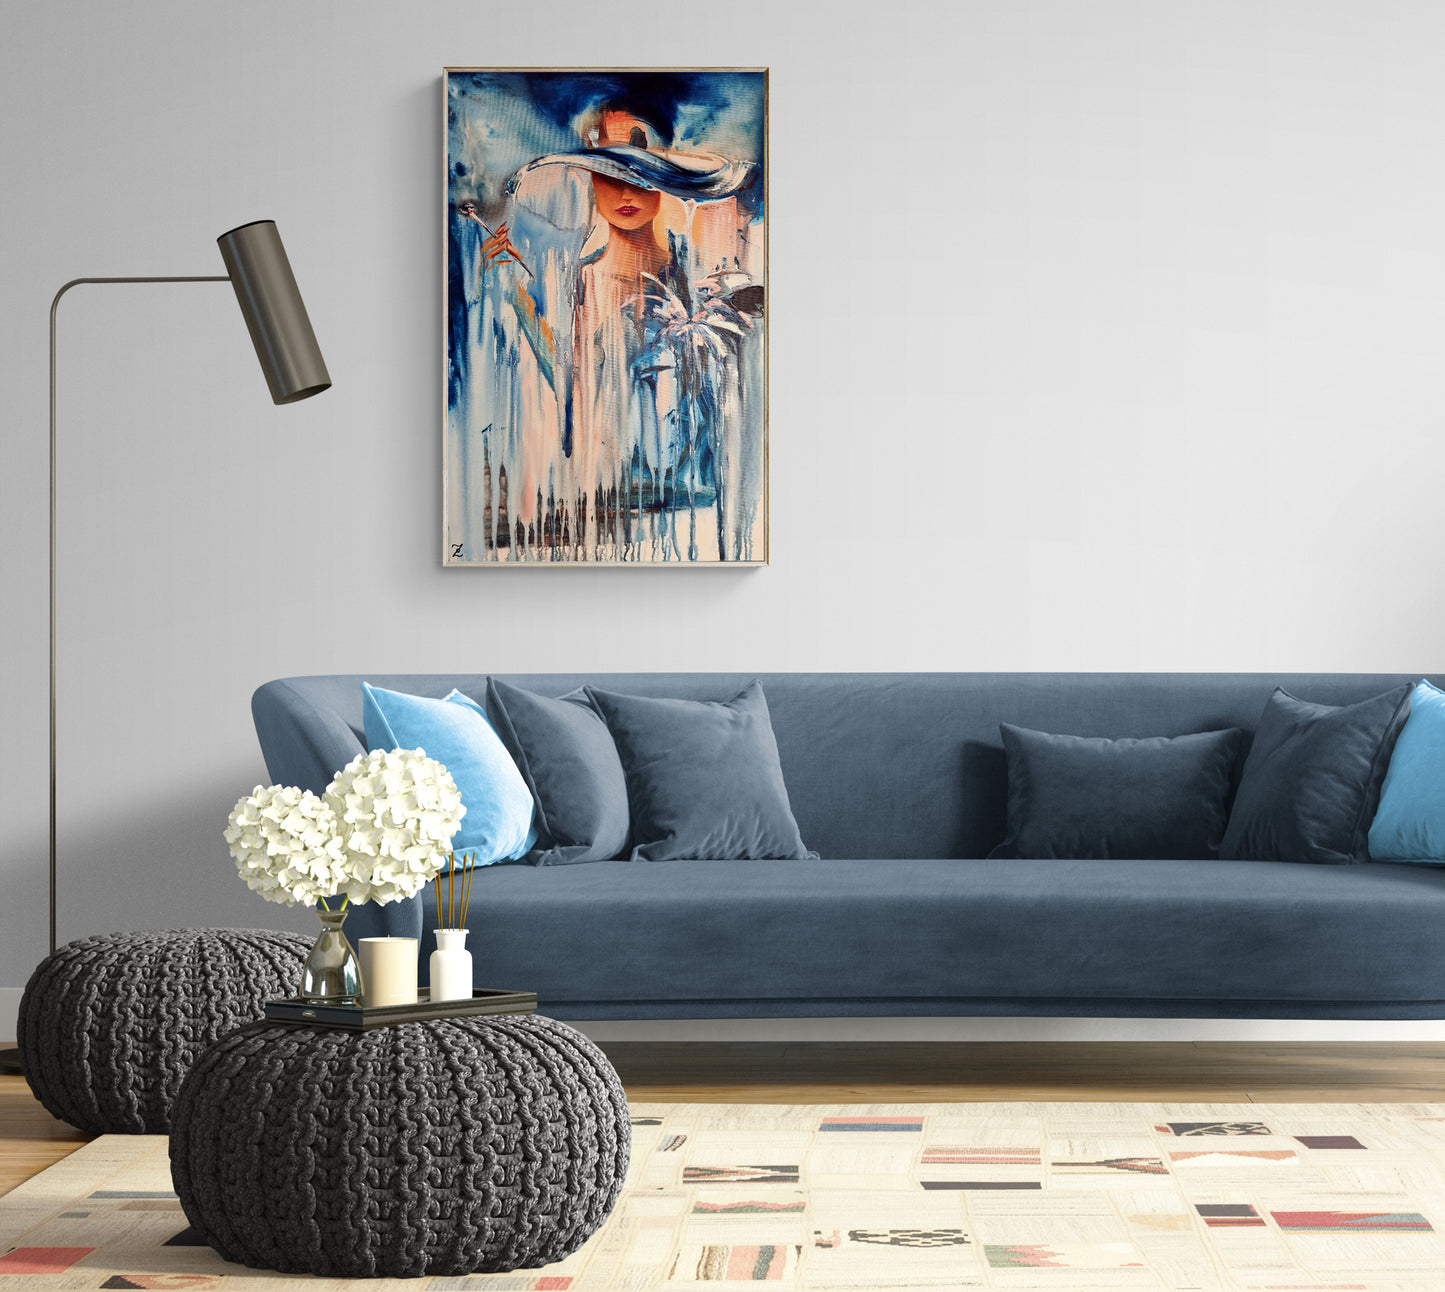 Original painting on canvas: "On a Rainy Day" 60x90cm